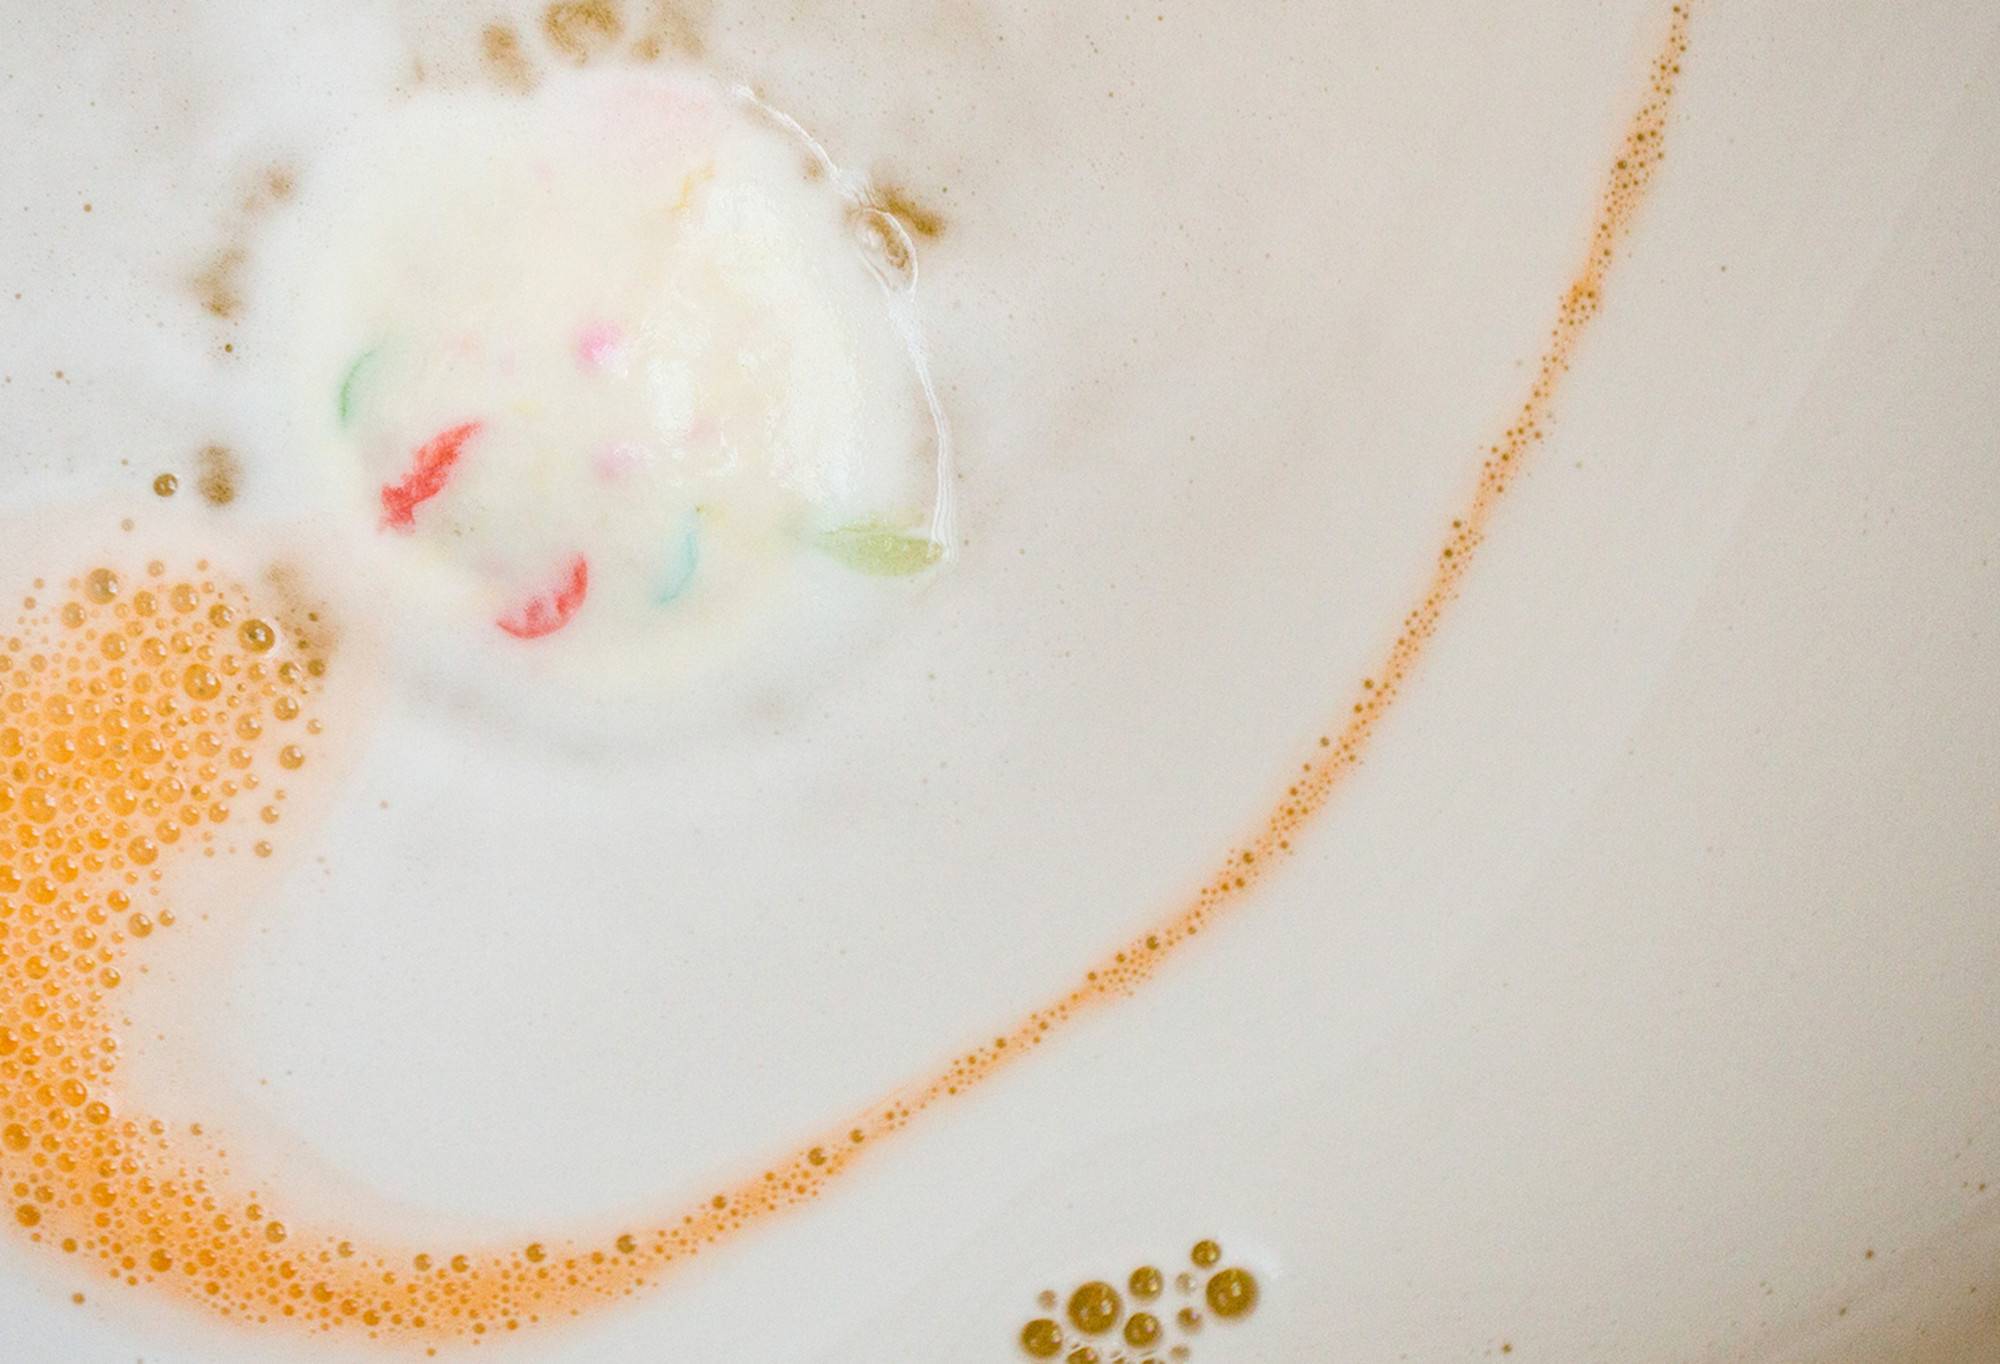 The Dragons Egg bath bomb has almost fully dissolved leaving behind a thick, velvety white blanket of foam with colourful flecks and golden yolk-yellow water beneath. 